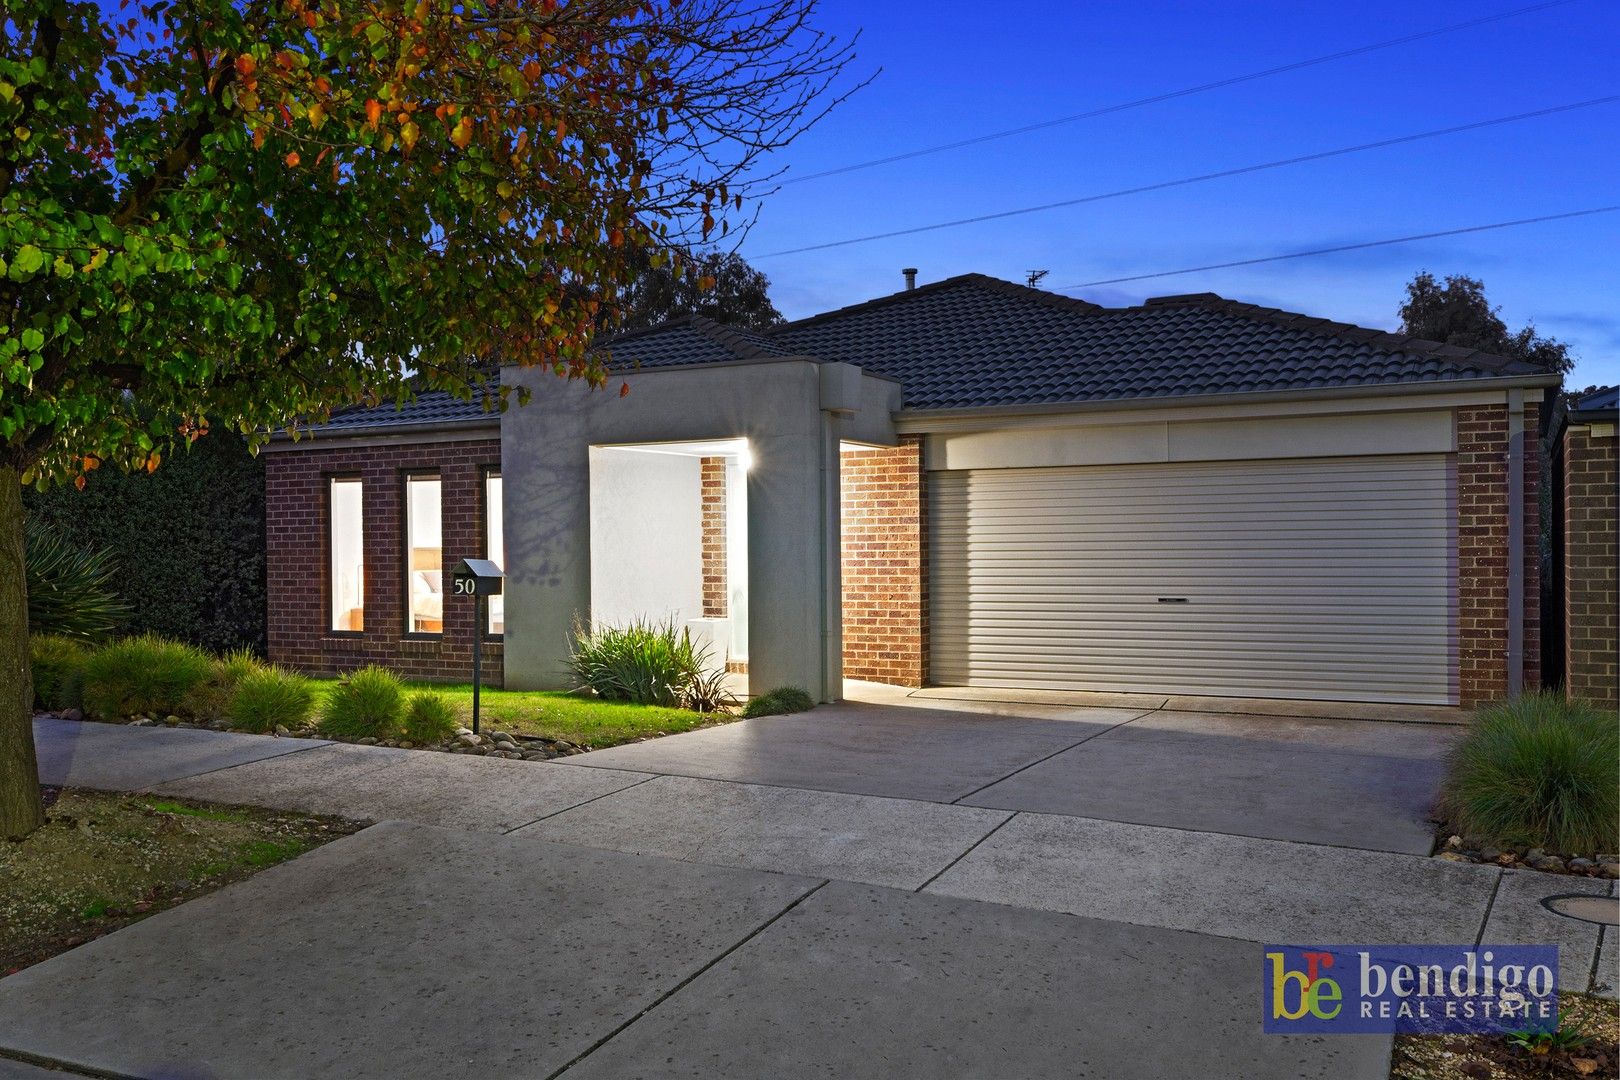 3 bedrooms House in 50 Soldatos Drive GOLDEN SQUARE VIC, 3555